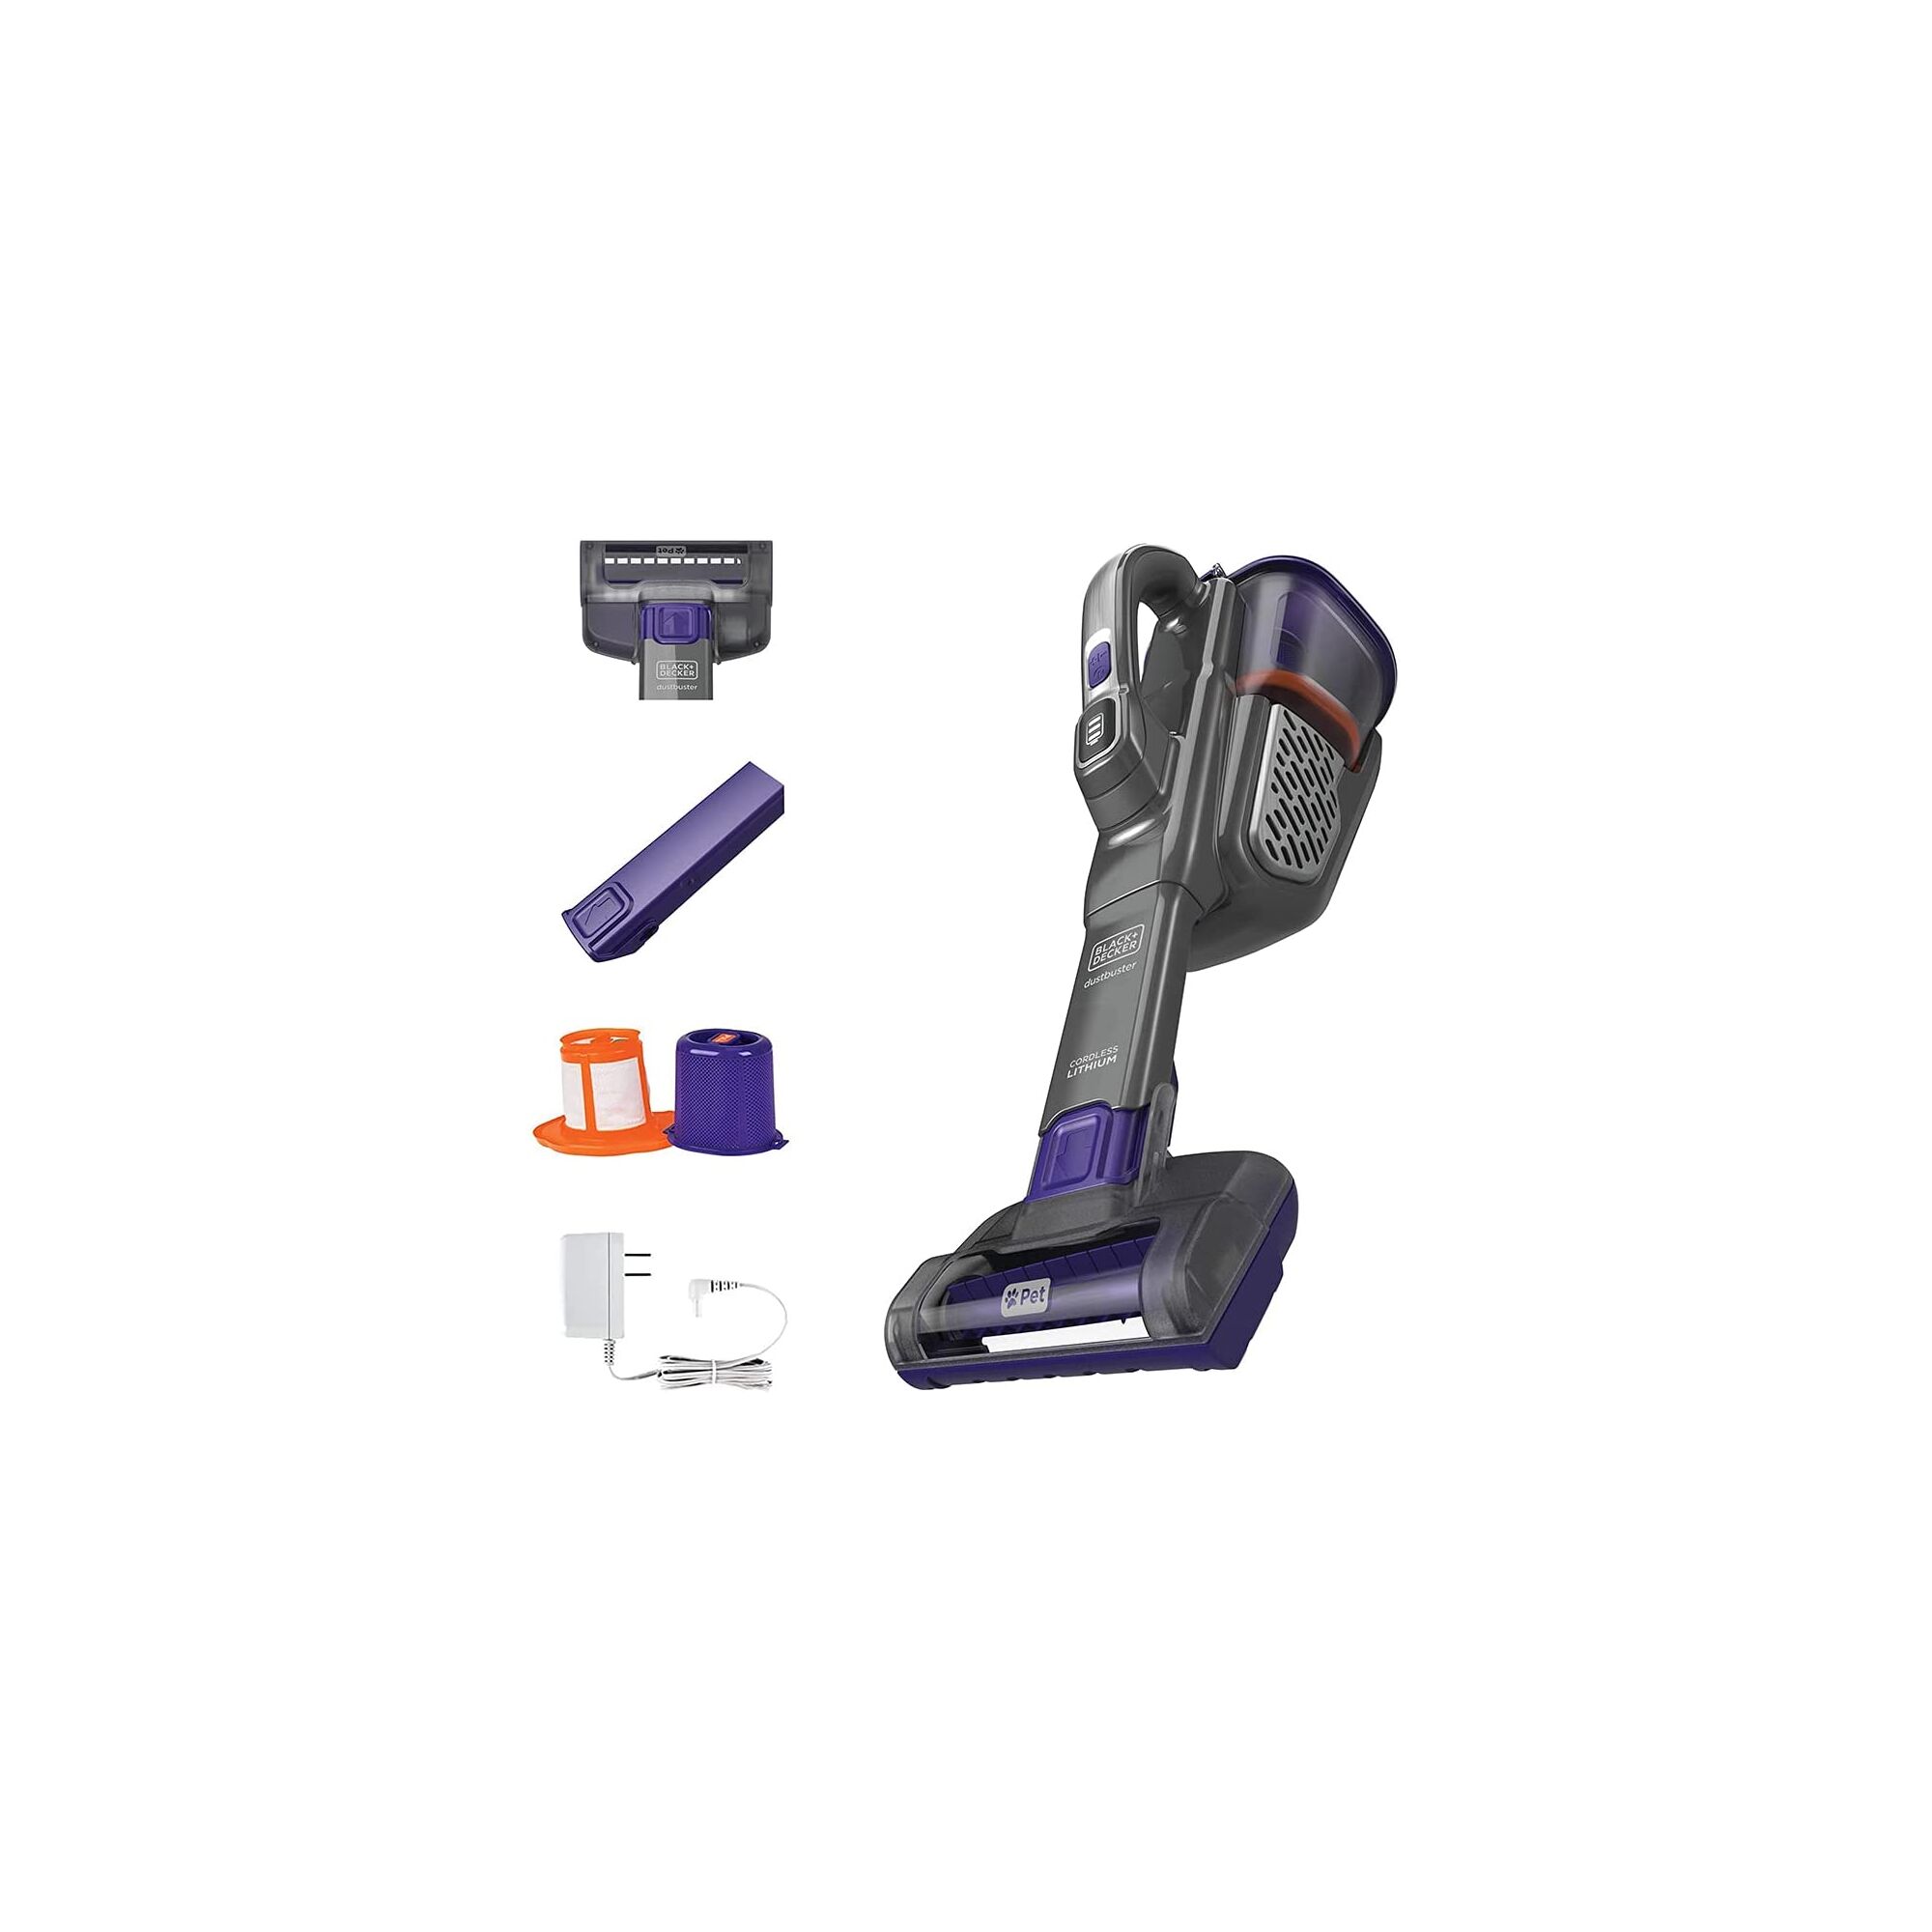 Kit contents for the BLACK+DECKER dustbuster